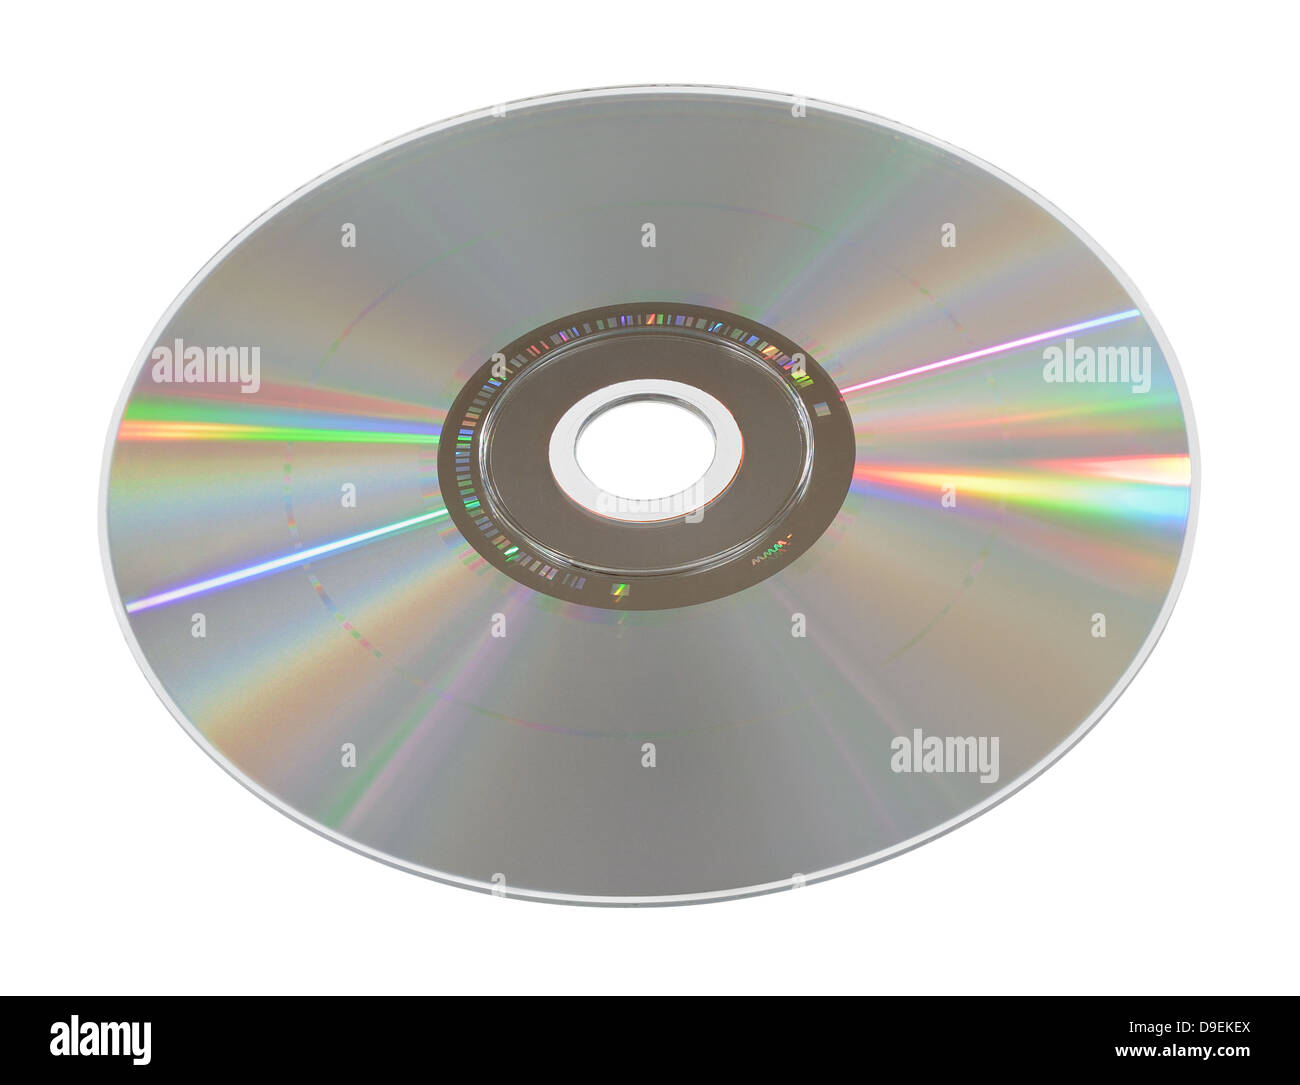 Compact disc Foto Stock